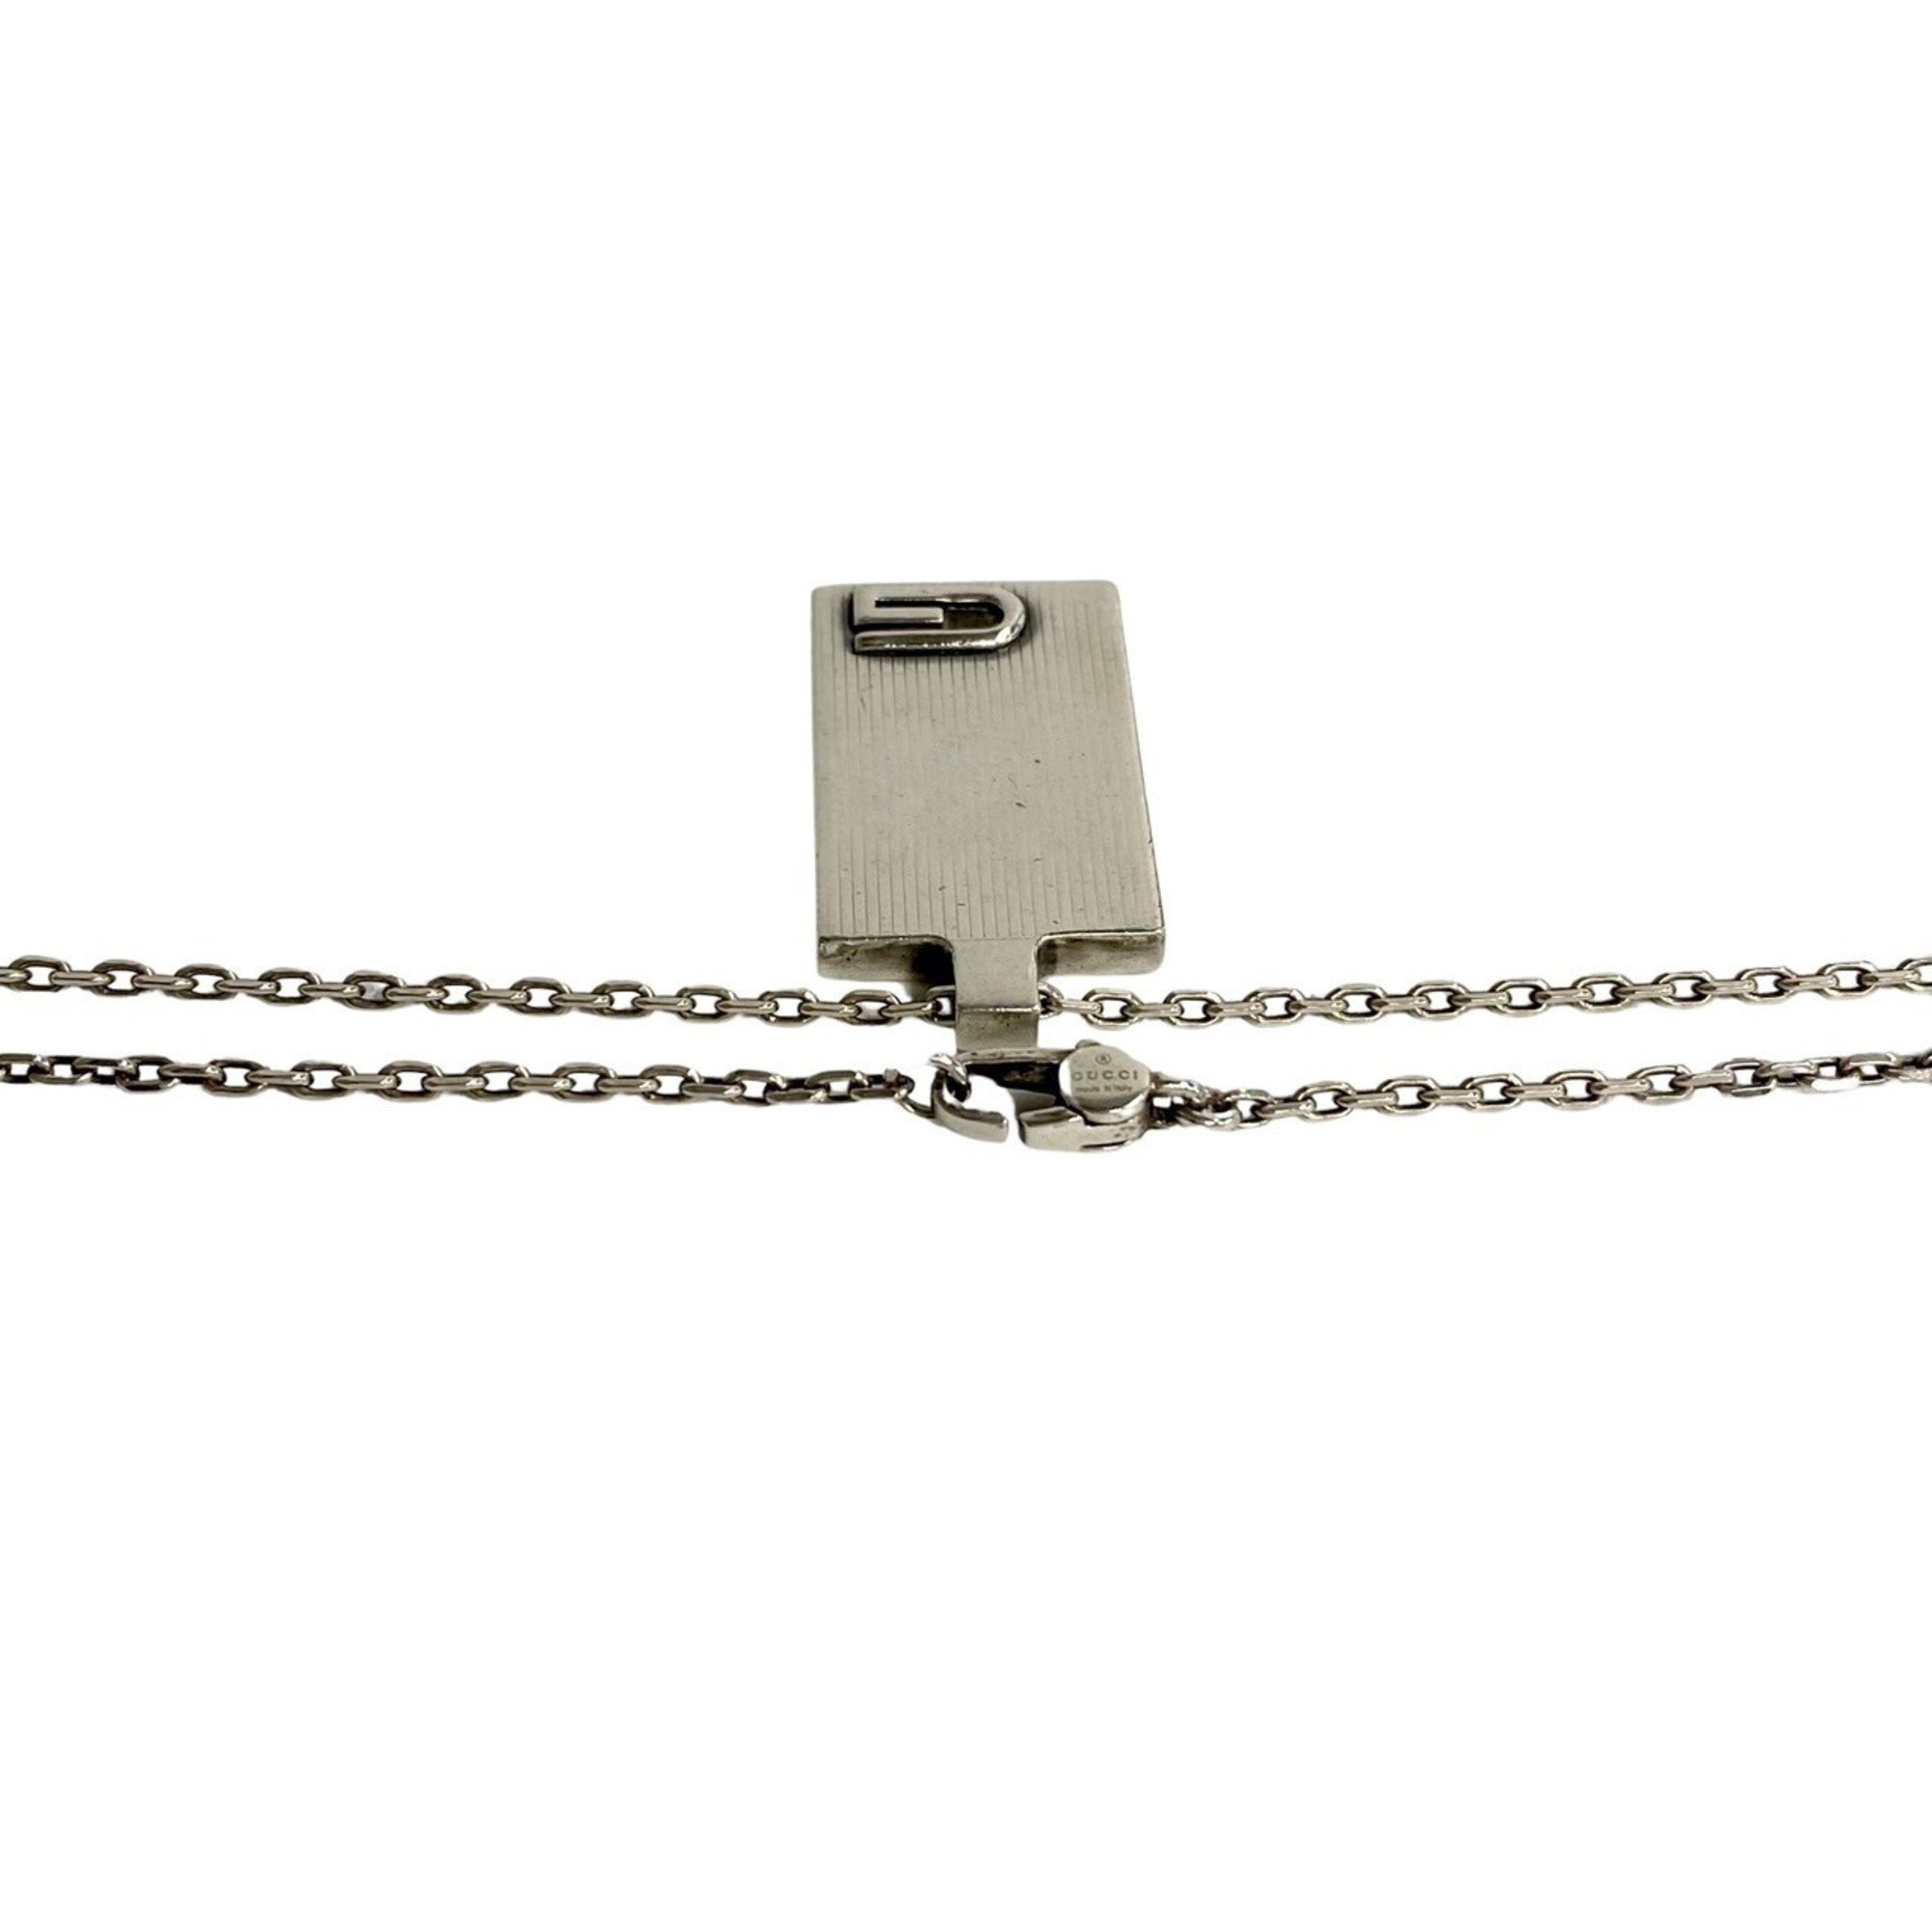 GUCCI G motif silver 925 chain necklace pendant for women and men, 29380